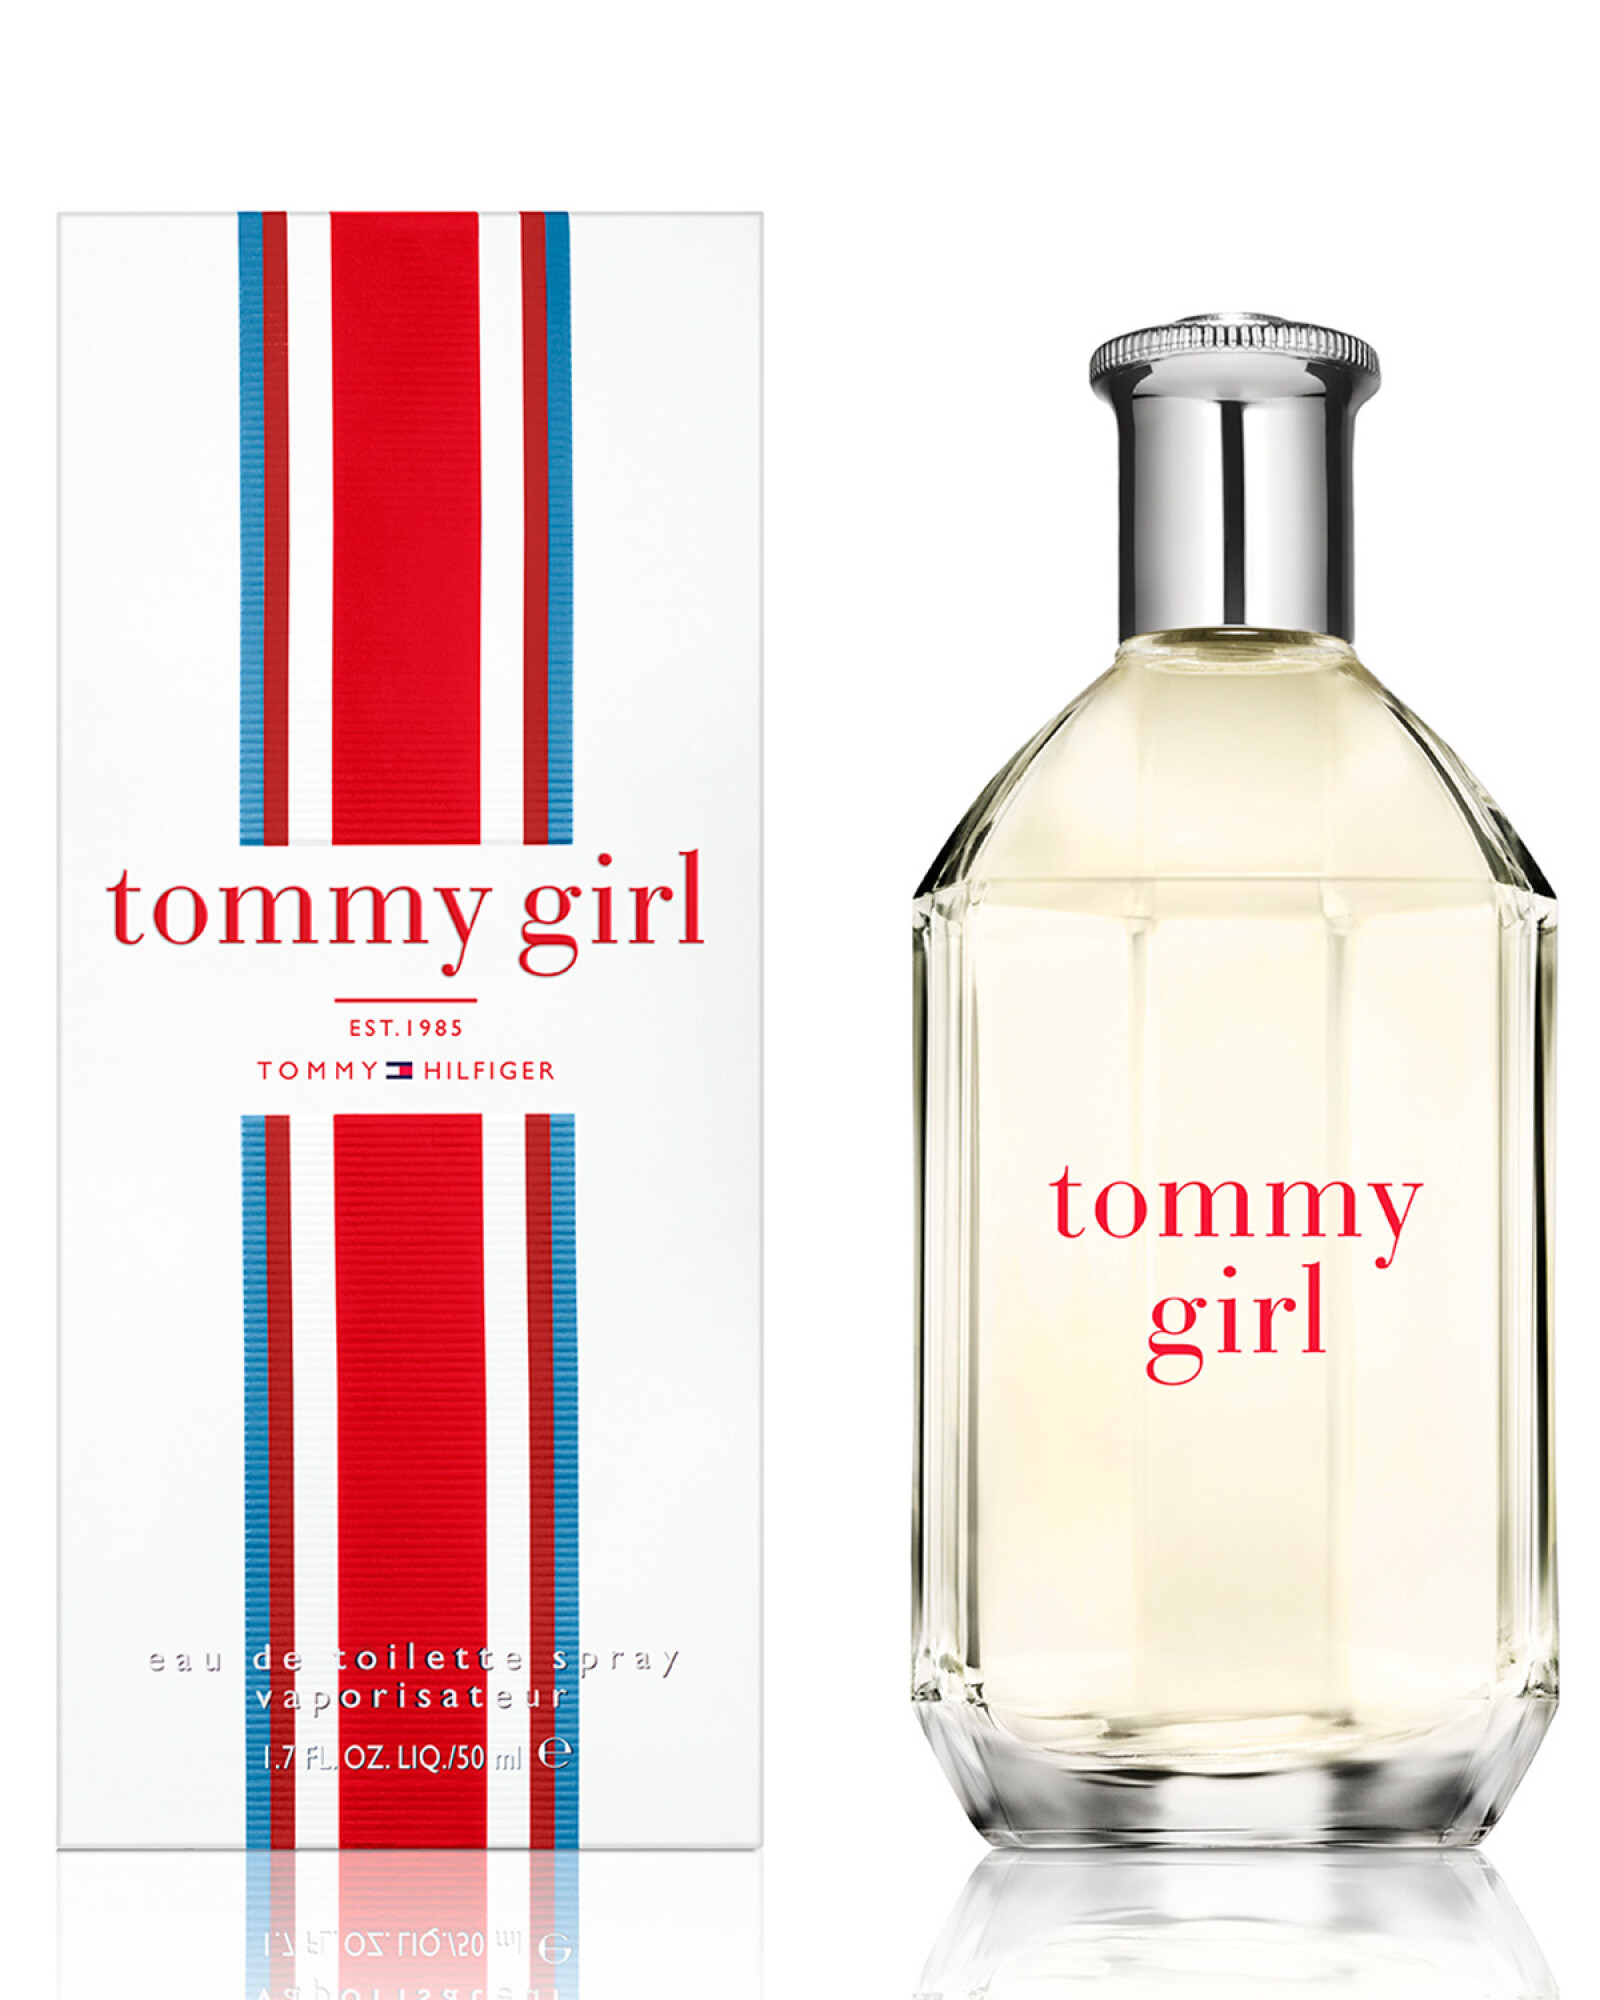 Perfume Mujer Tommy Girl Tommy Hilfiger Edt con Ofertas en Carrefour